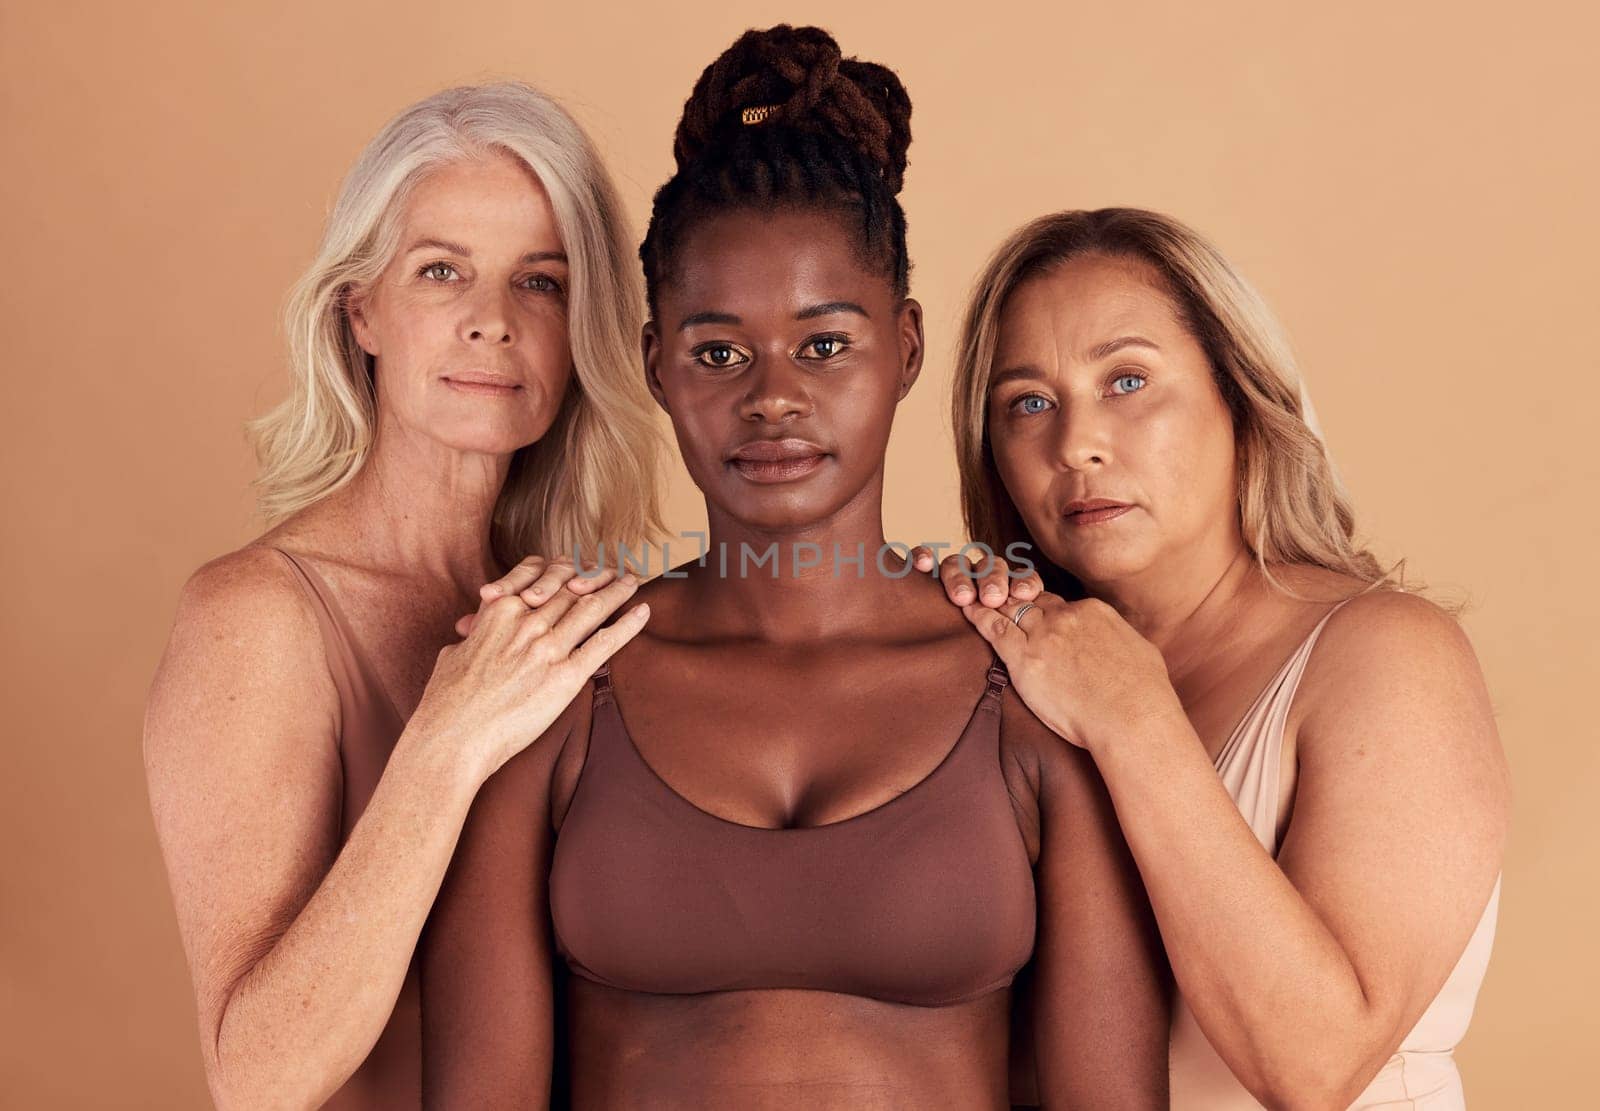 Women, natural body and diversity of beauty on studio background for skincare, cosmetics and empowerment. Portrait female group of people in underwear together for self love, community and confidence.